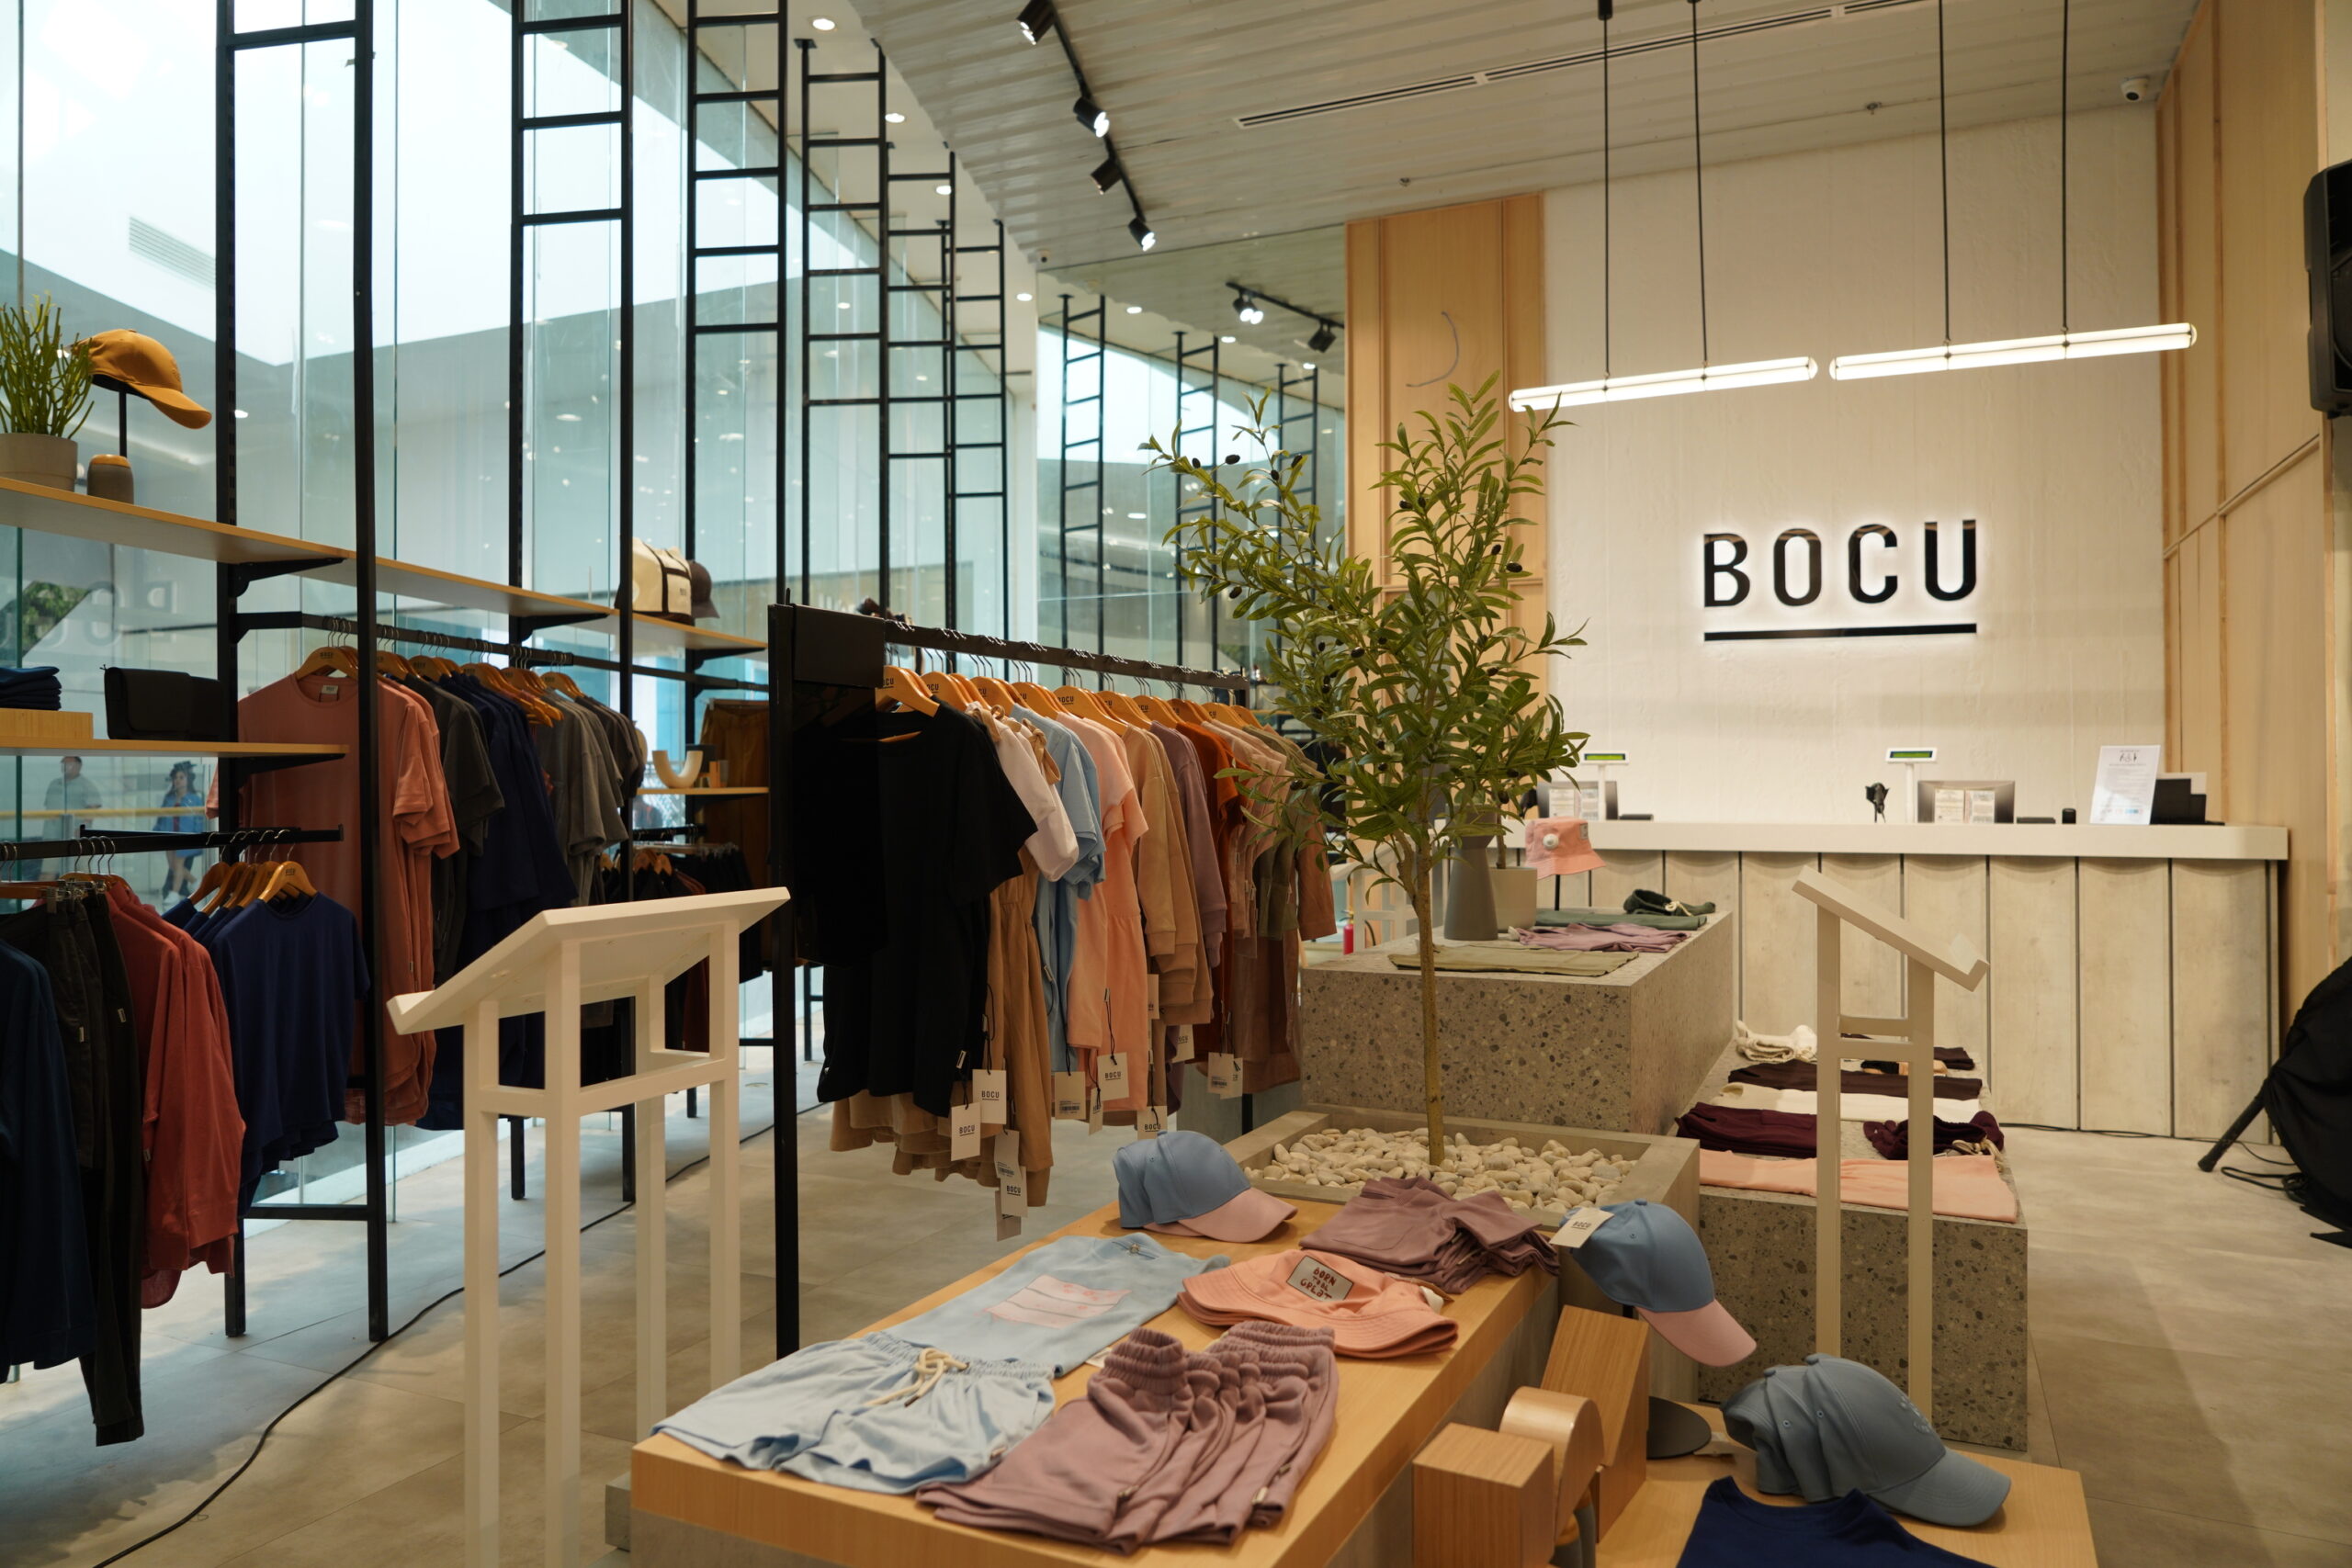 Brand specializing in effortless, trend-proof clothing opens first mall store